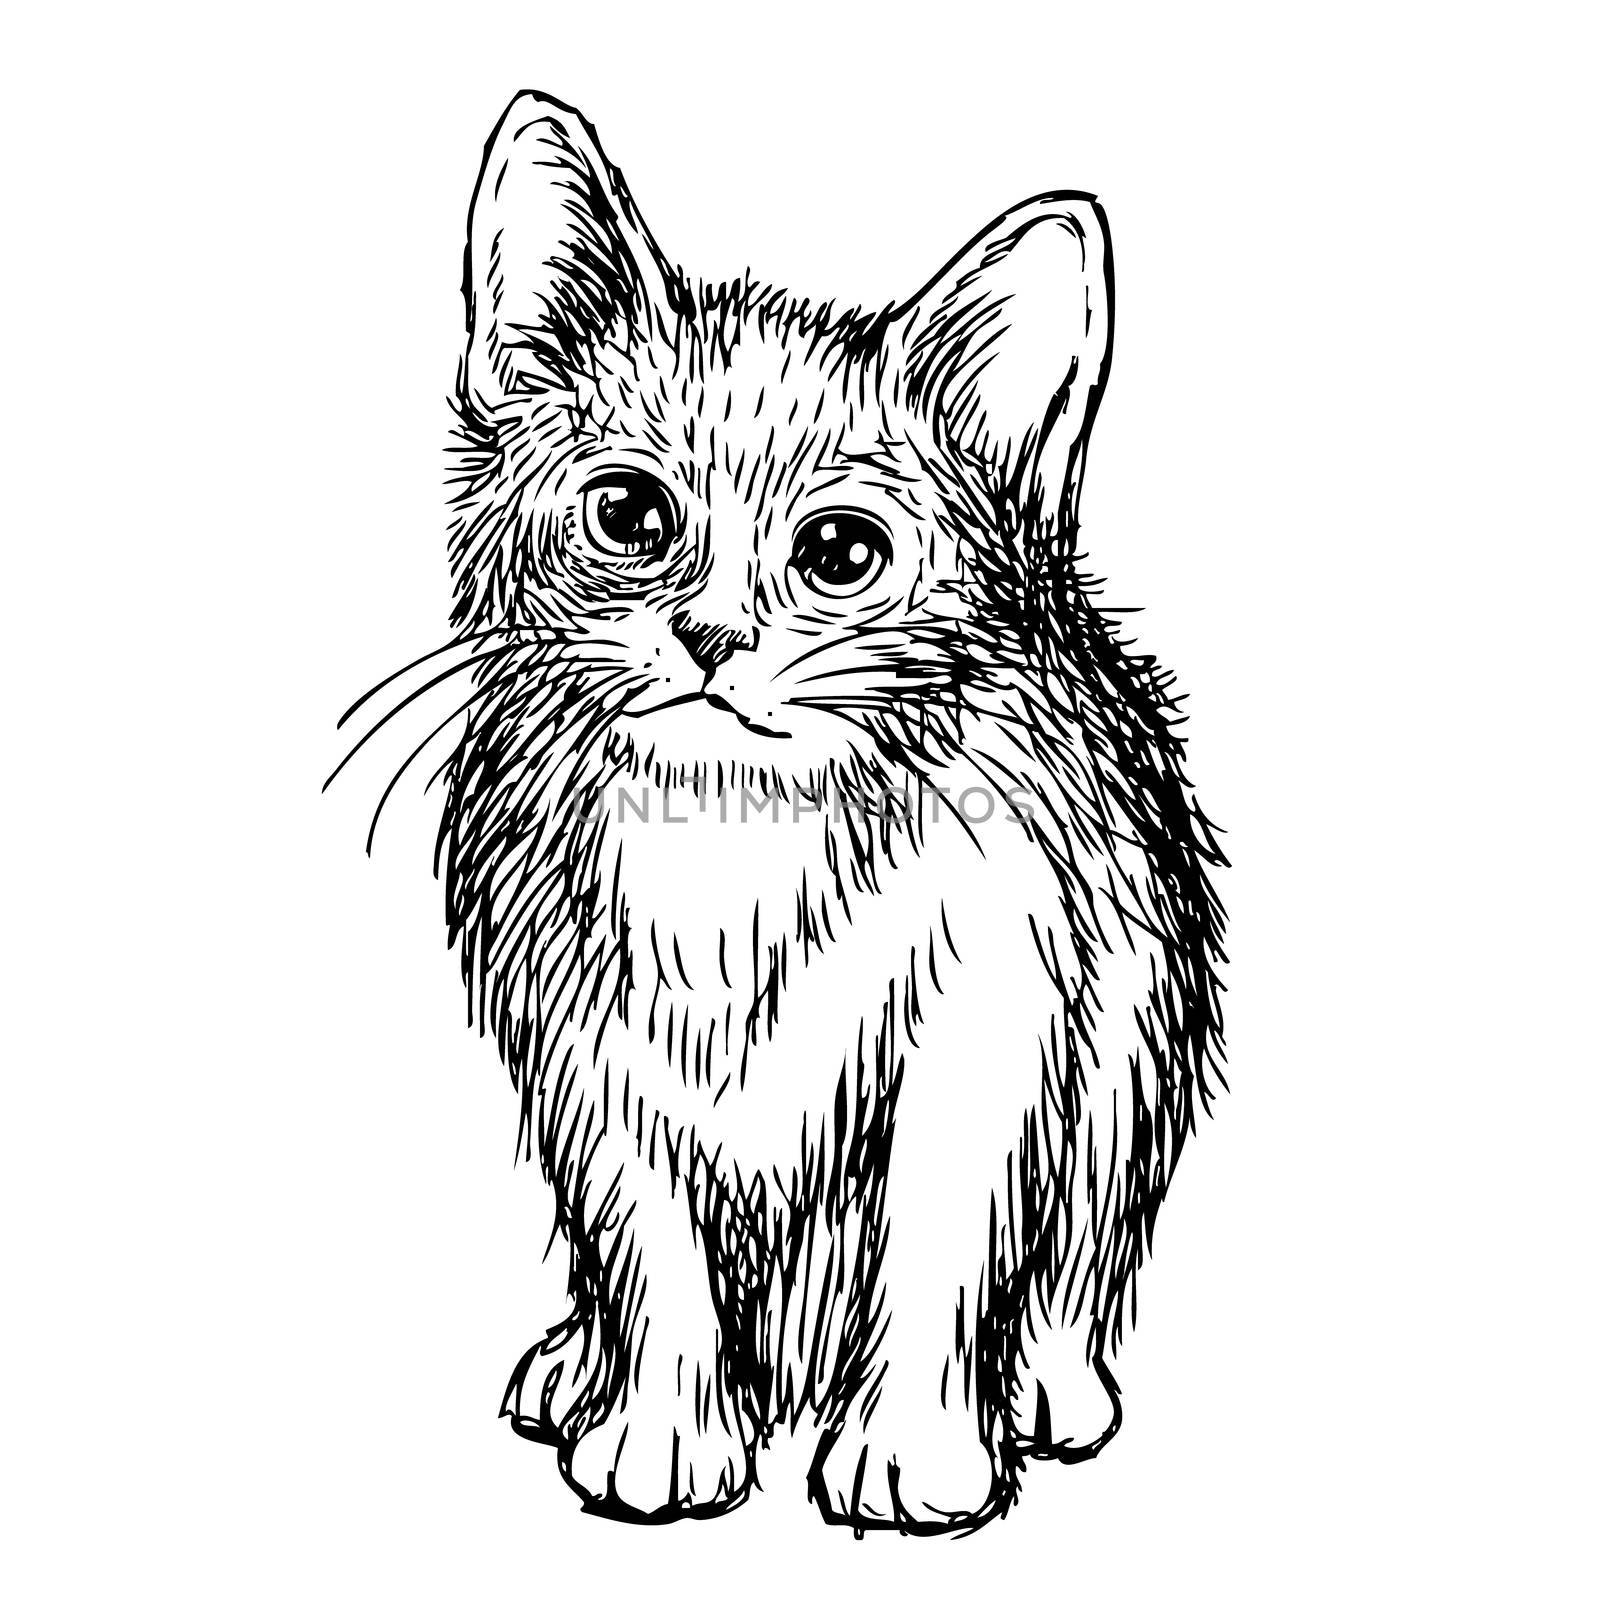 freehand sketch illustration of little cat, kitten doodle hand drawn